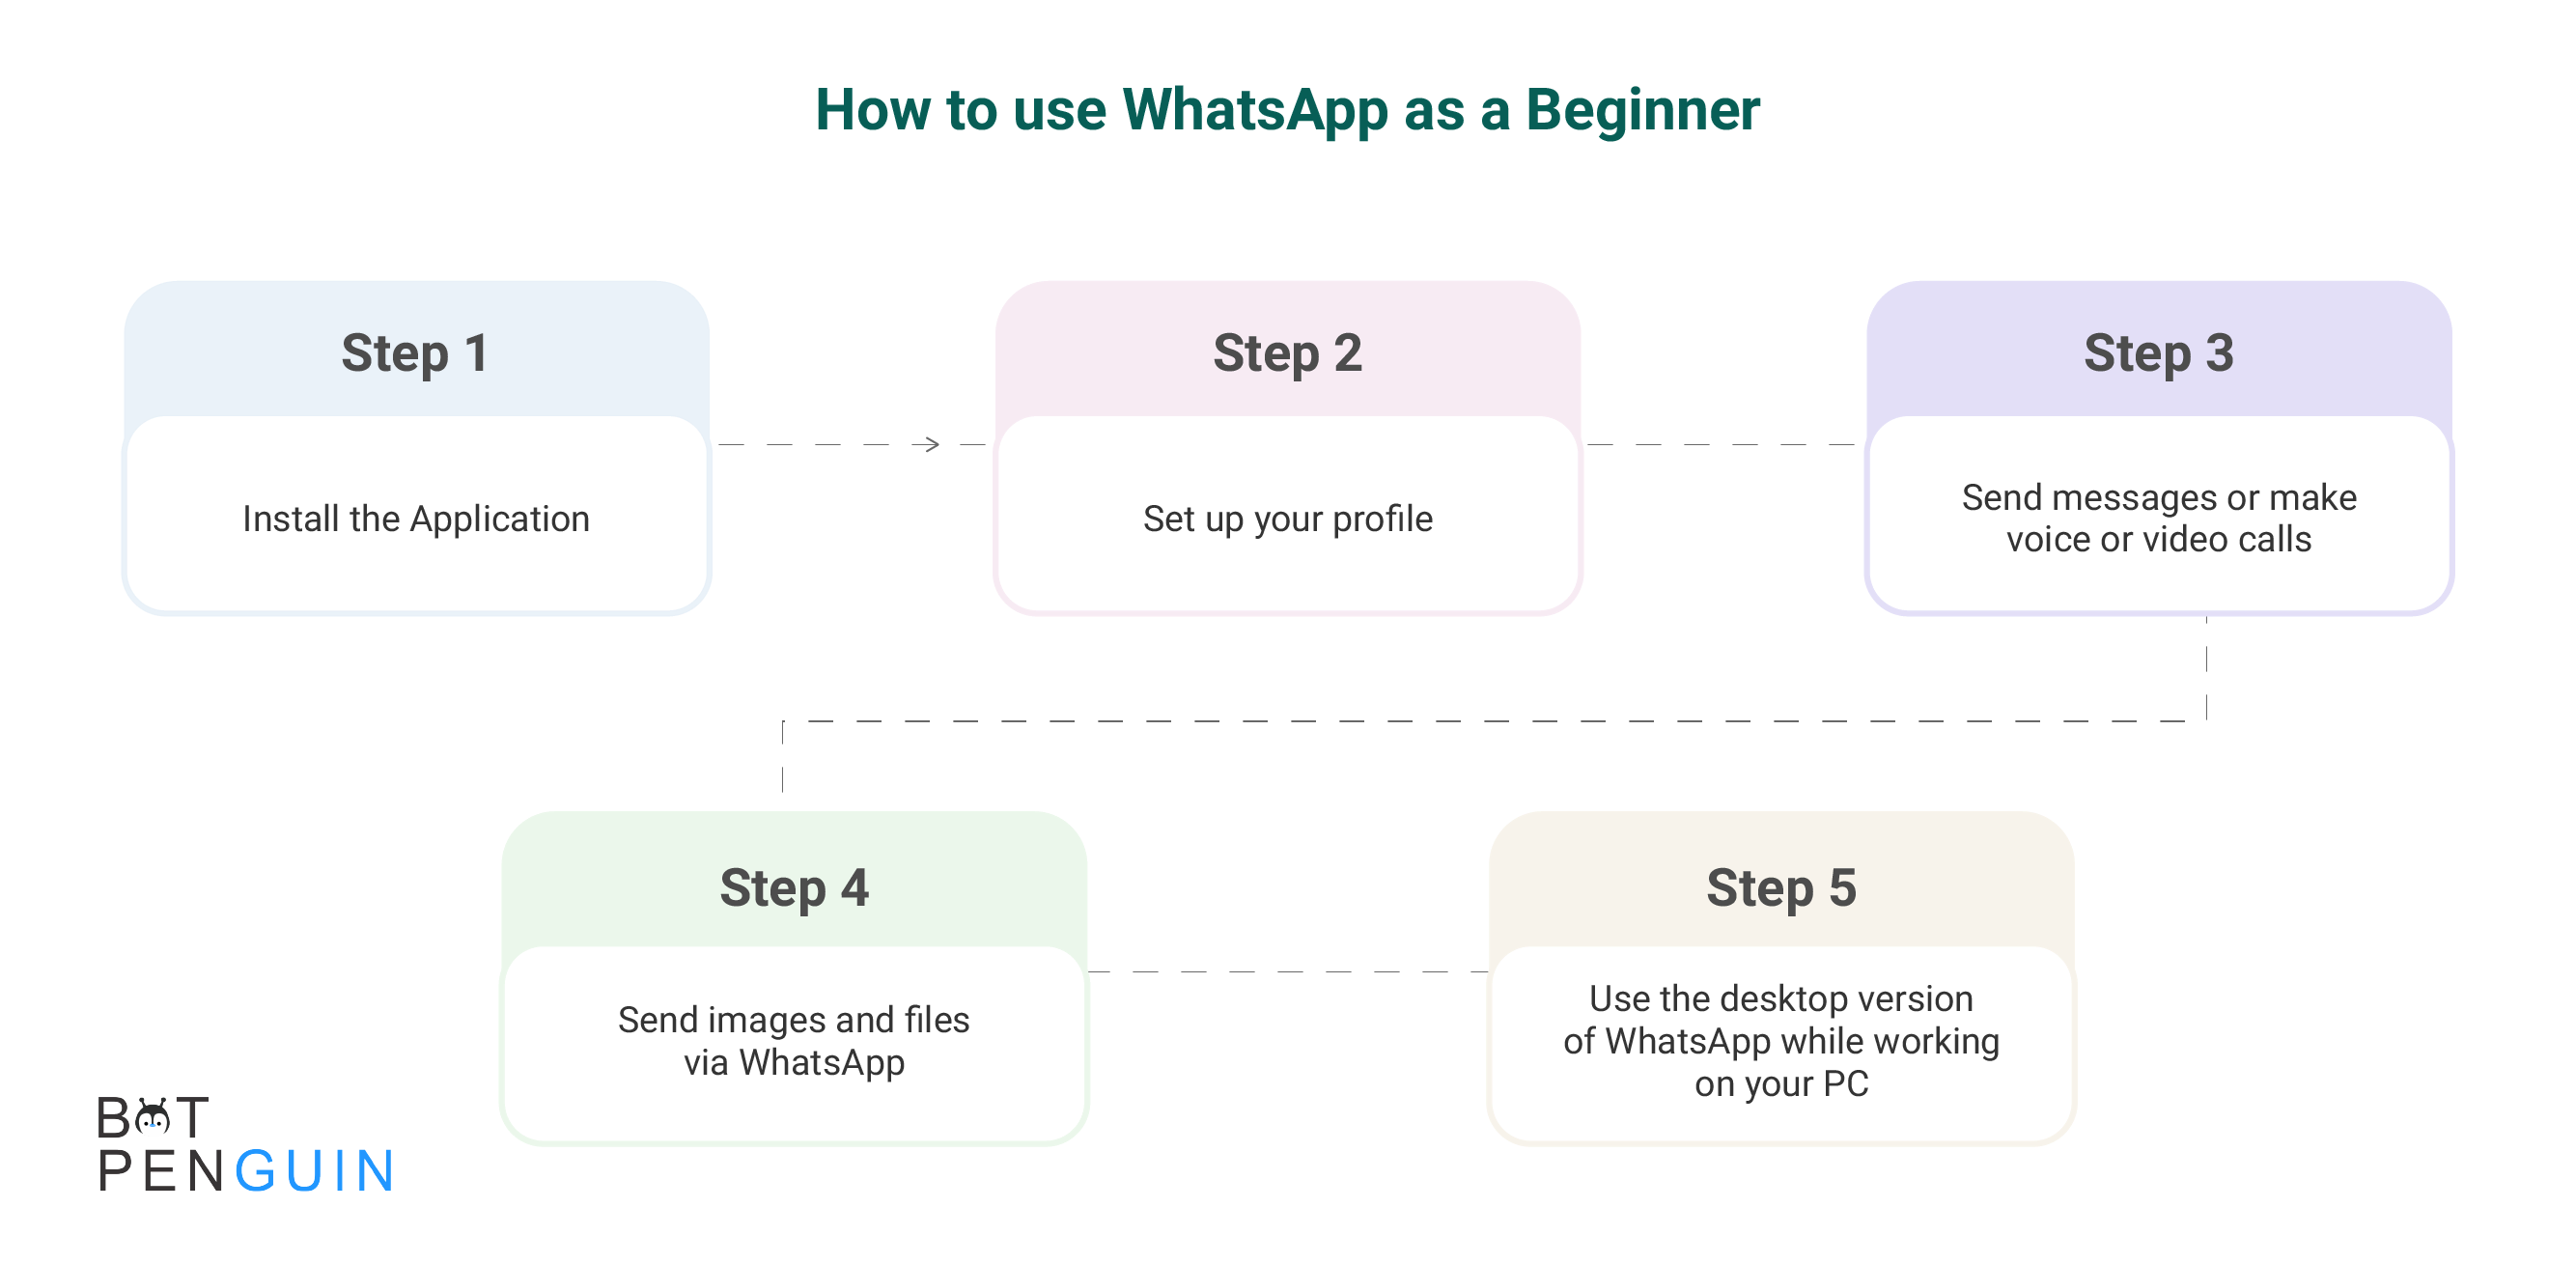 Easy guide on how to use WhatsApp if you are a beginner